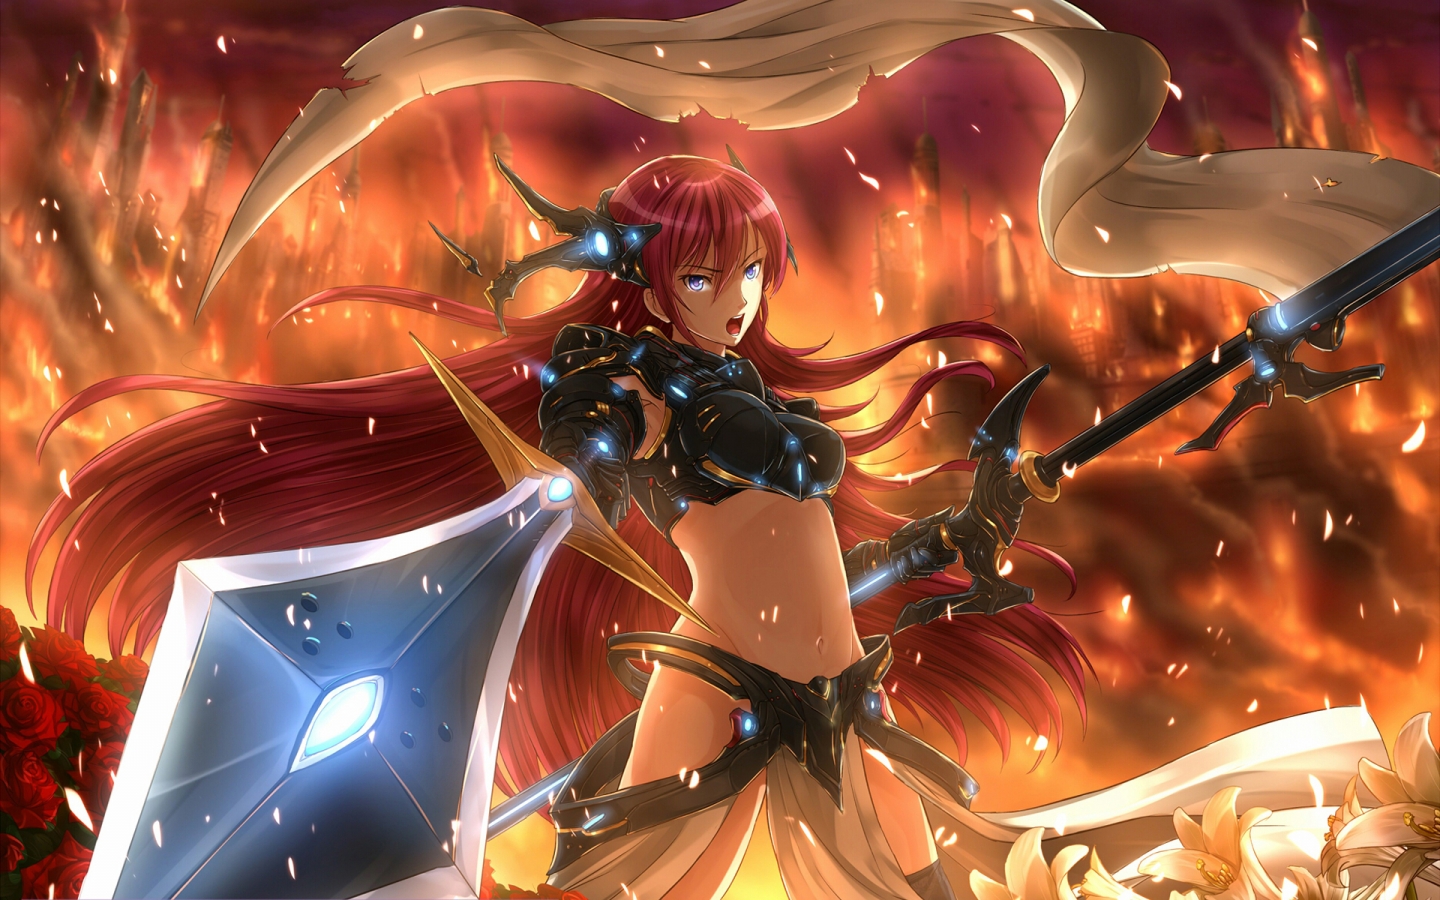 Megurine Luka in Fire for 1440 x 900 widescreen resolution